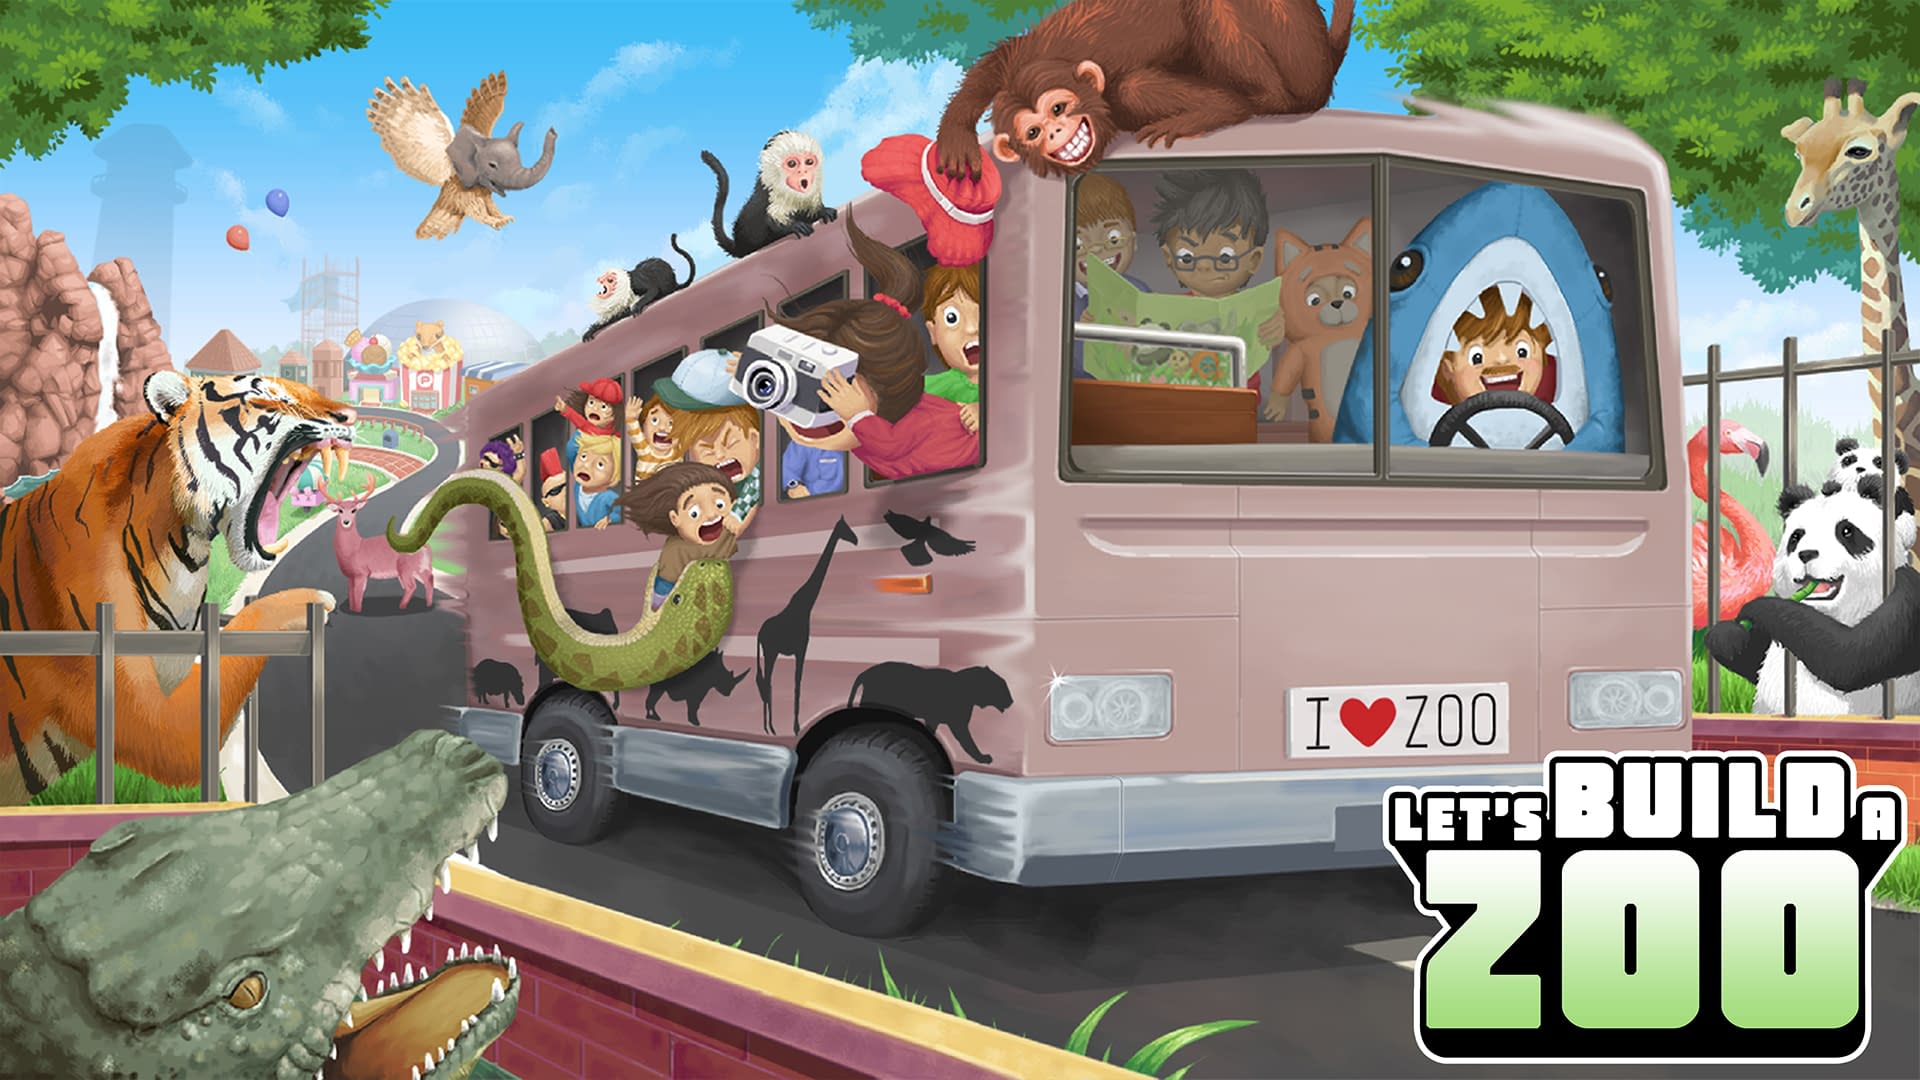 Let's Build A Zoo Review Header